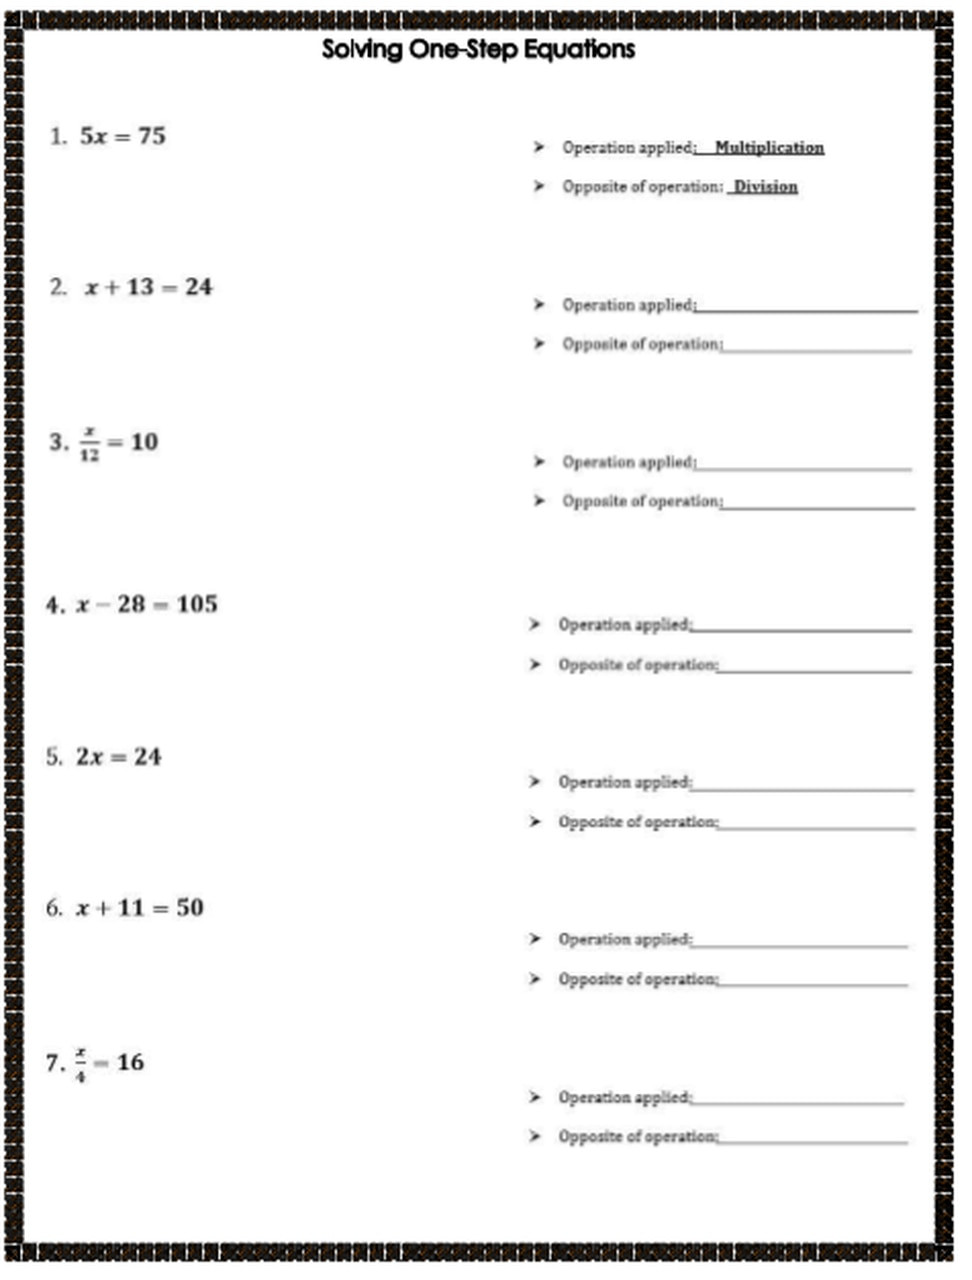 One Step Equations Worksheet Pdf Introduction to solving E Step Equations